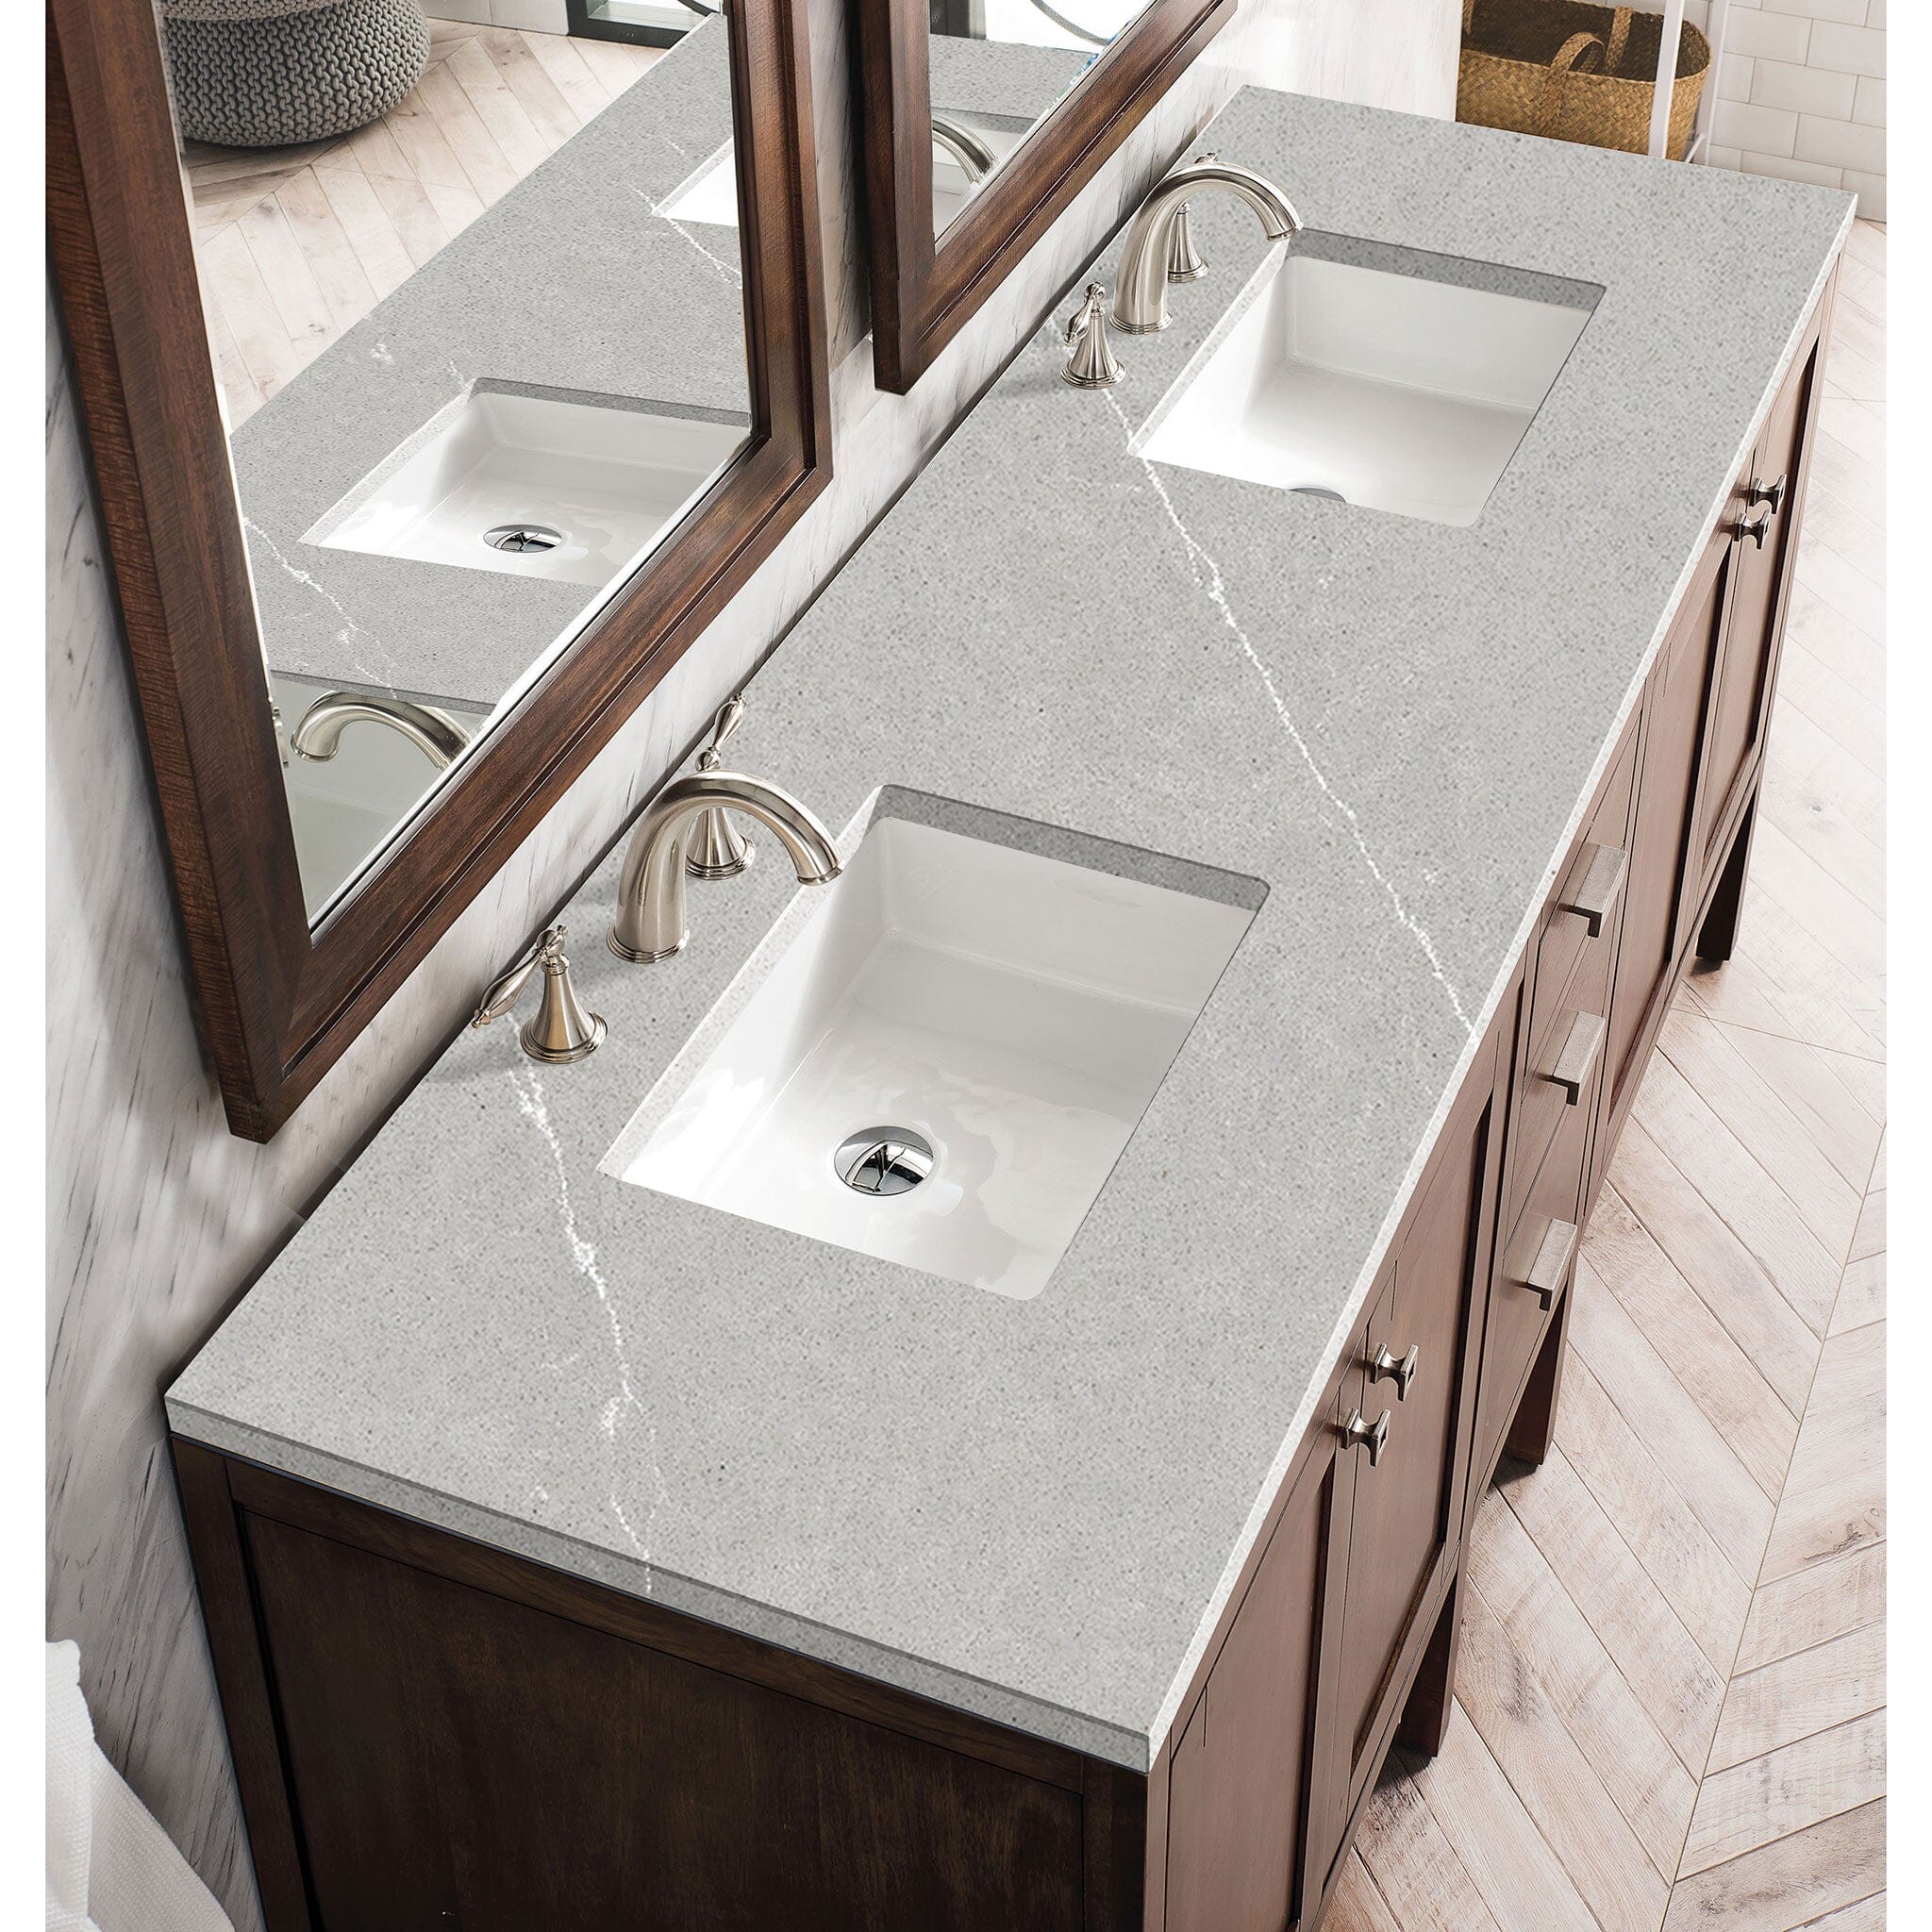 Marbleous Over-the-Sink Shelf from Seventh Avenue ®